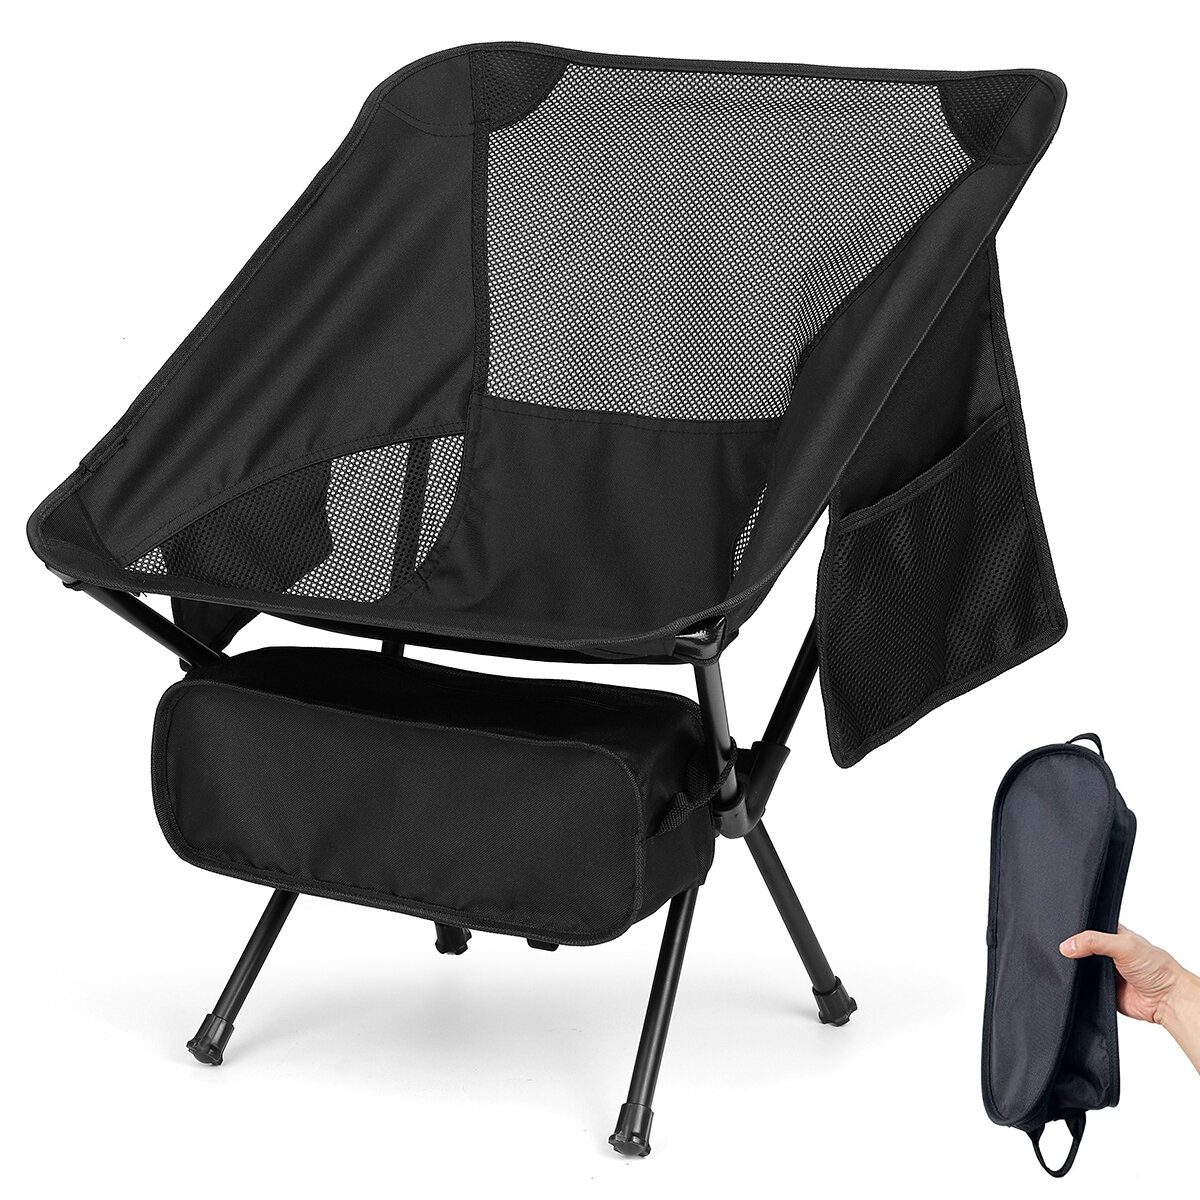 Outdoor Camping Chair Portable Folding Chair Beach Hiking Picnic Seat Fishing Tools Chair with 2 Sto